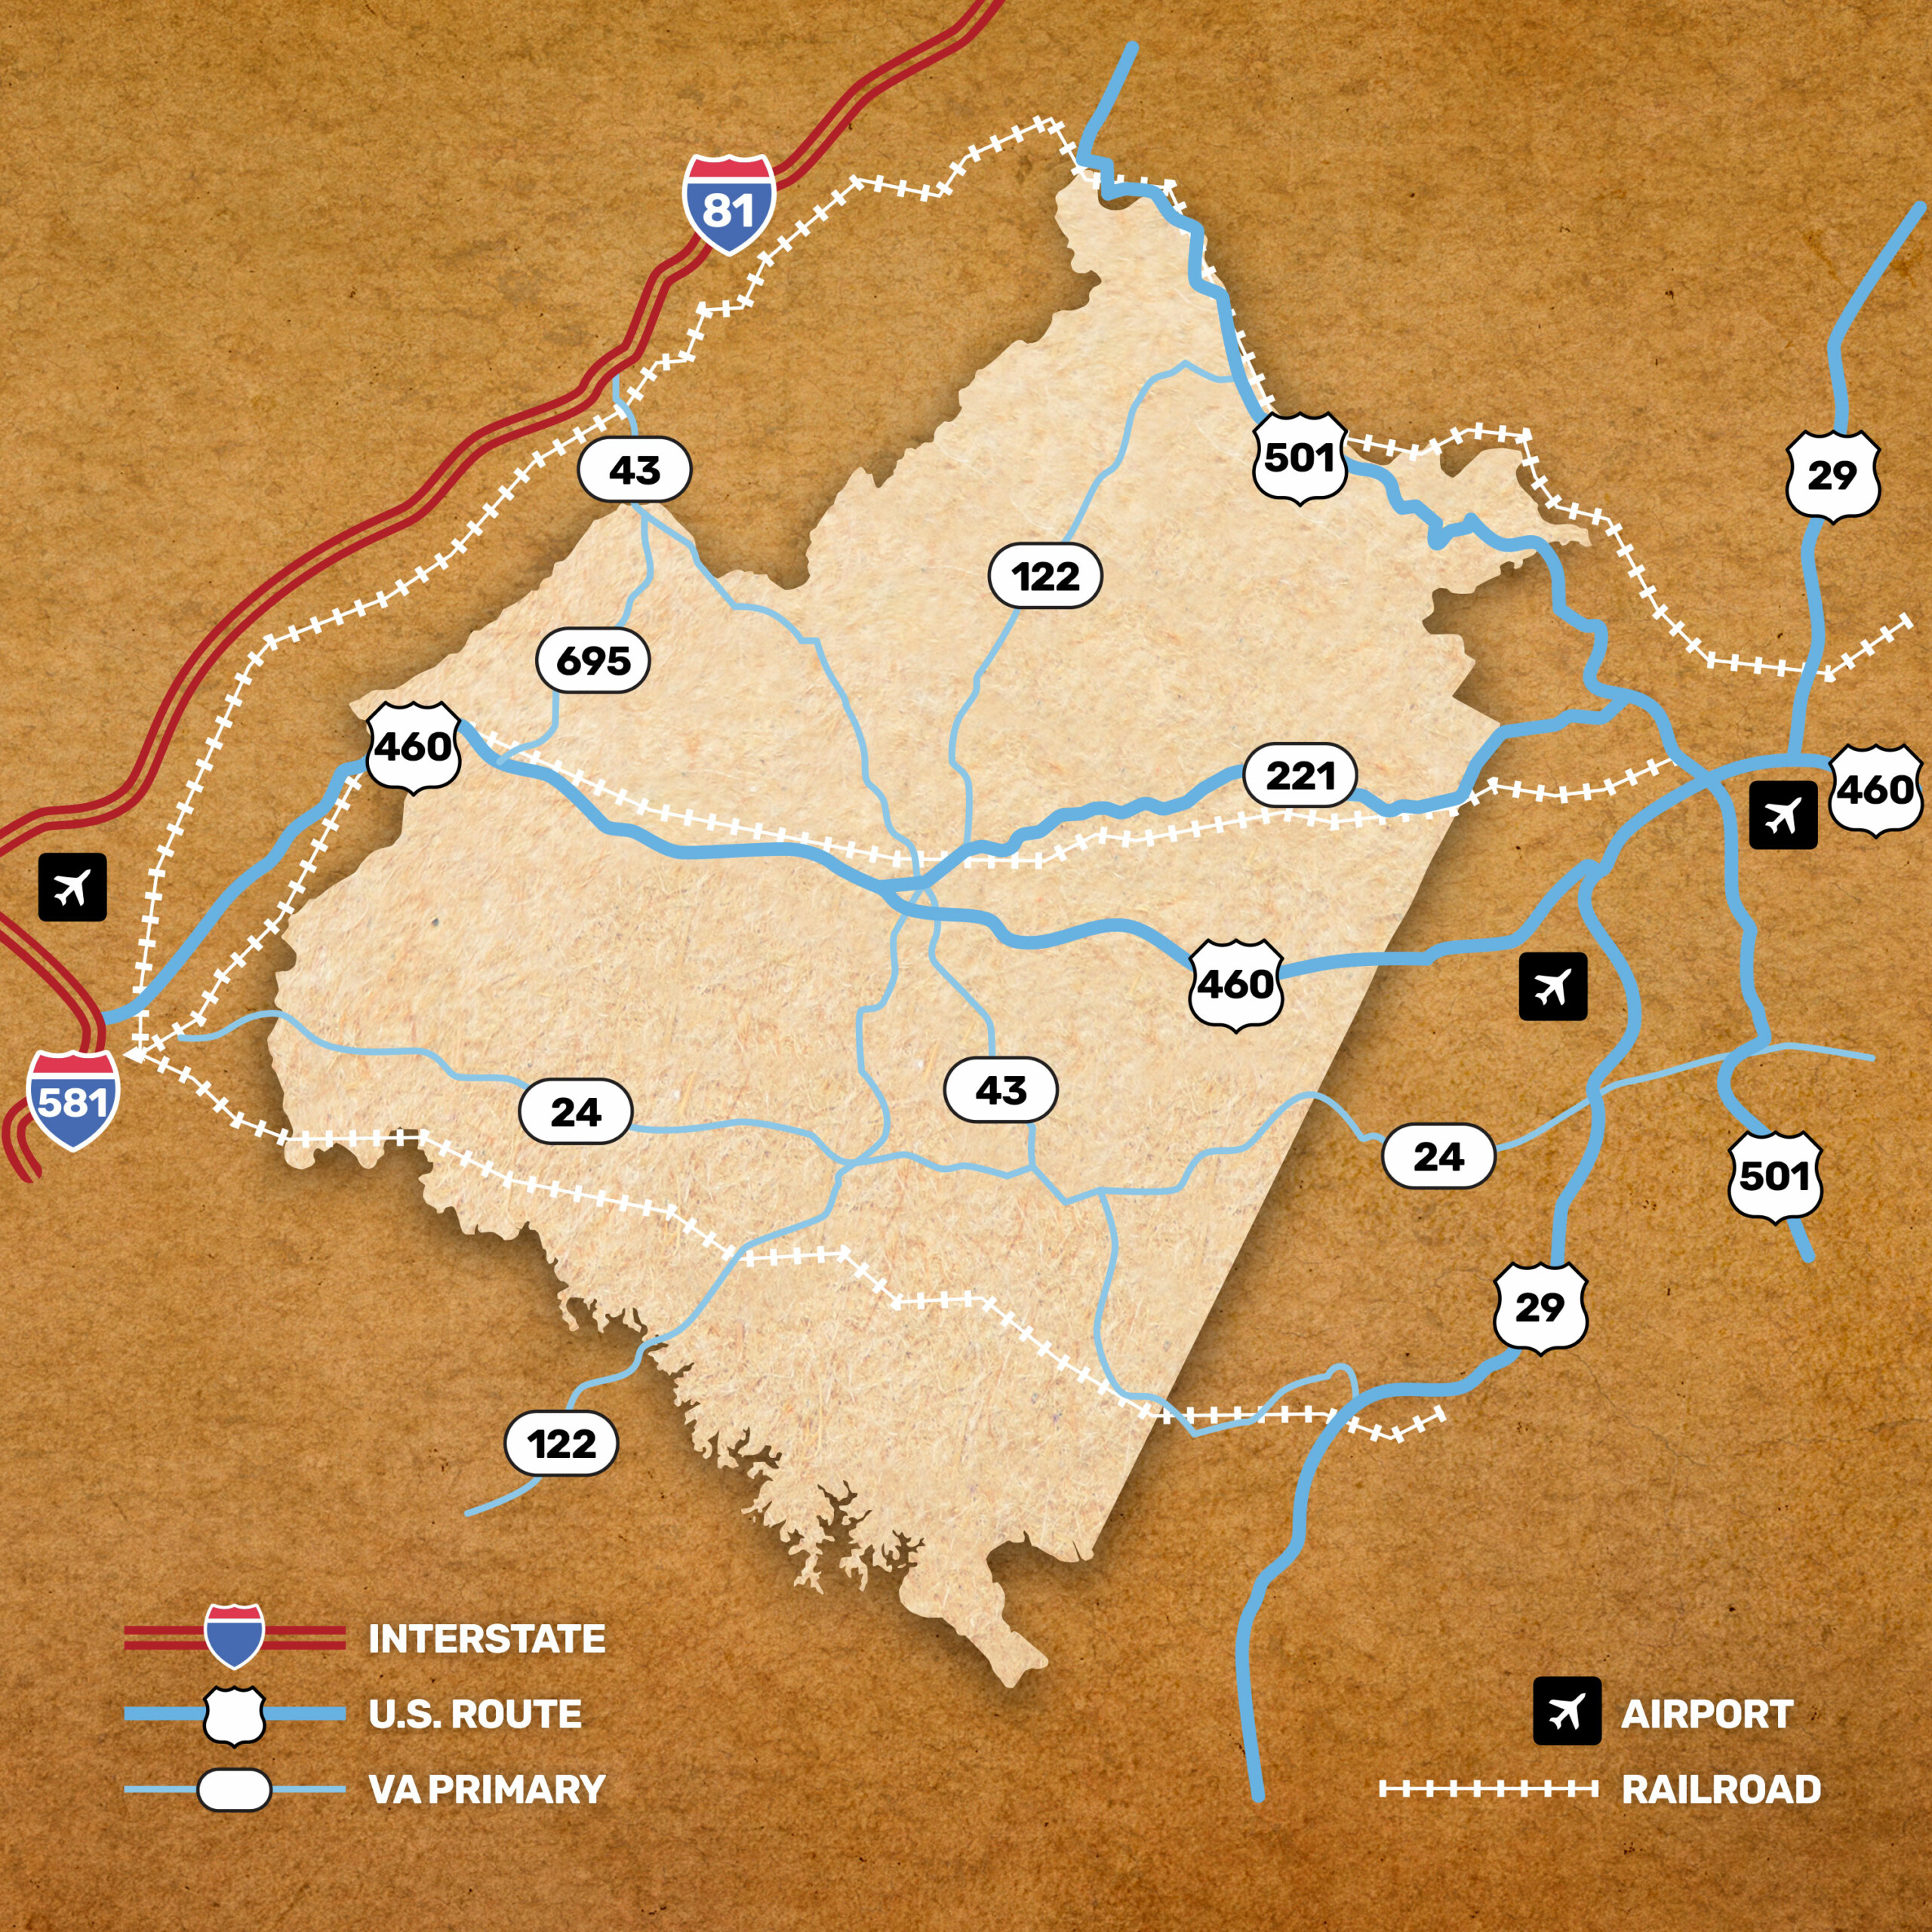 Map of Interstates, Highways, primary roads, Railroads, and Airports in Bedford County and area